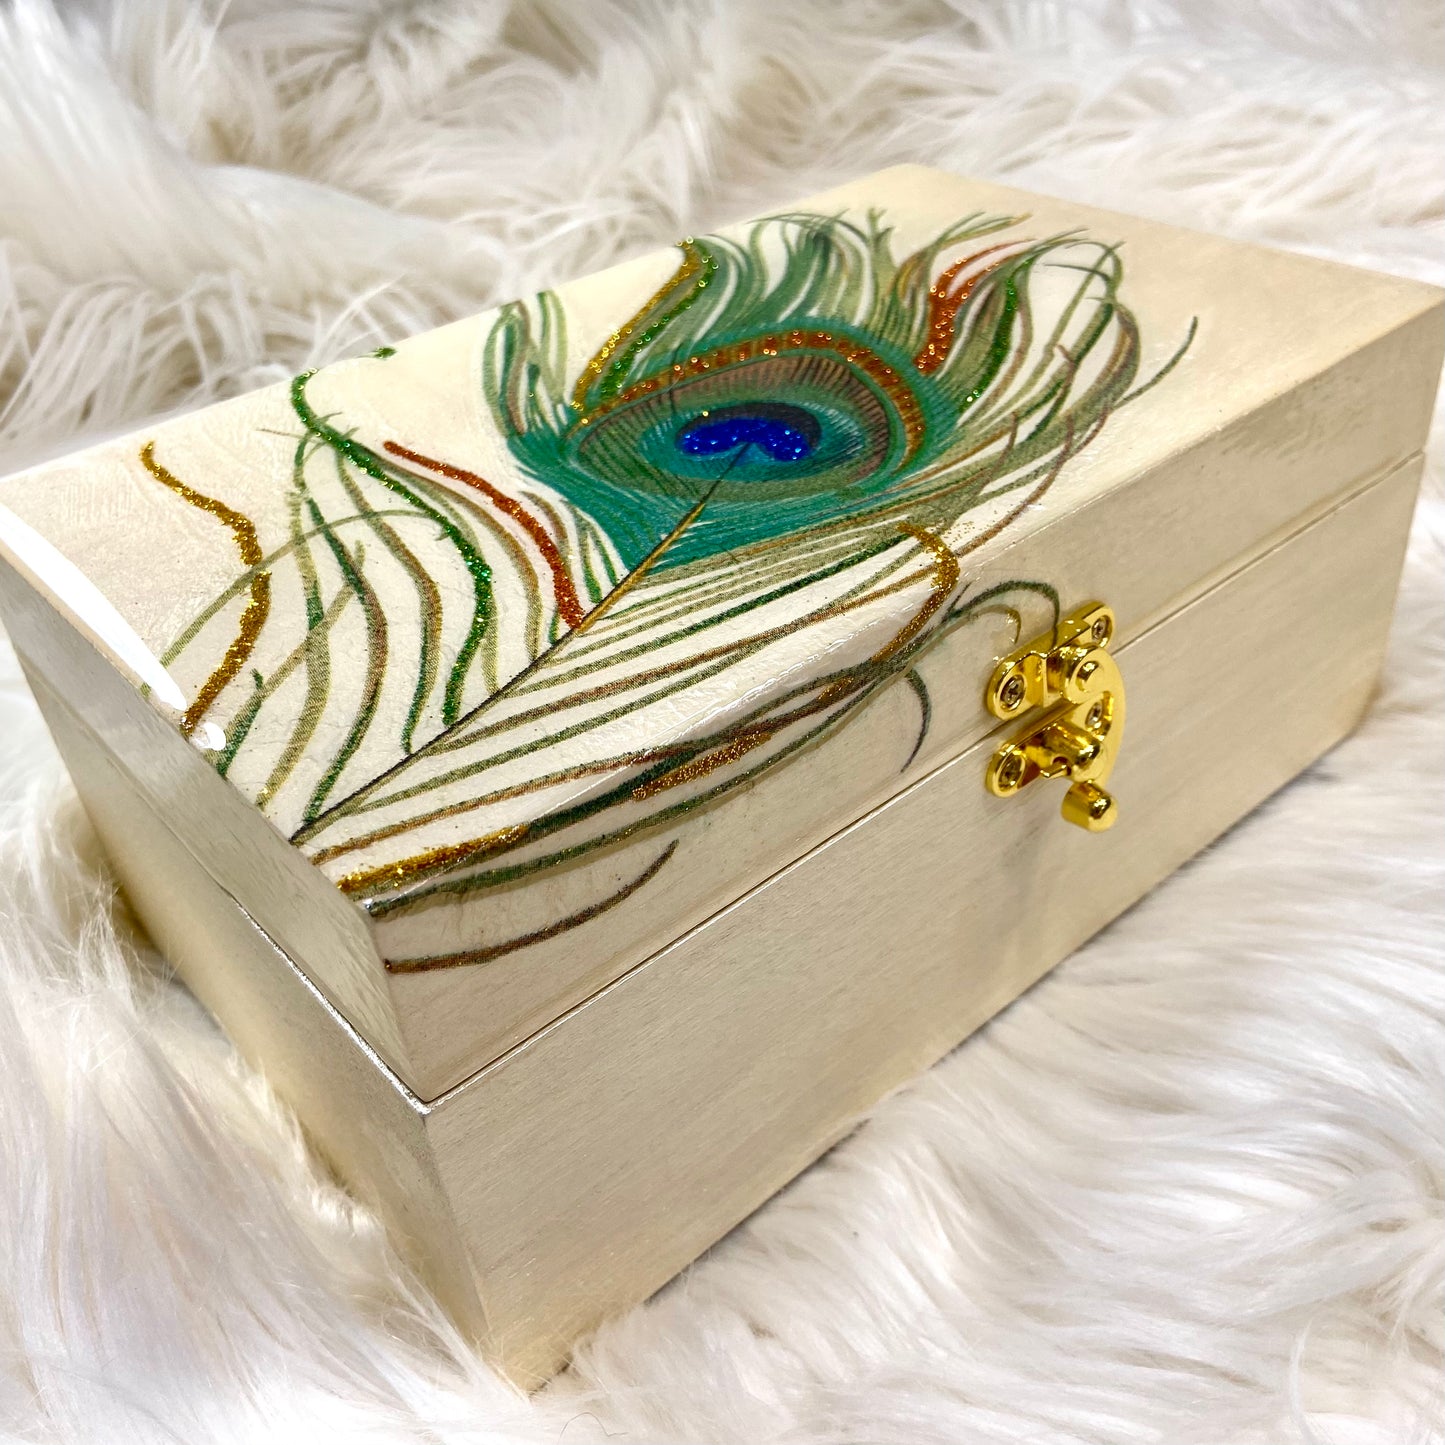 Peacock Feather Decorative Box with Mirror